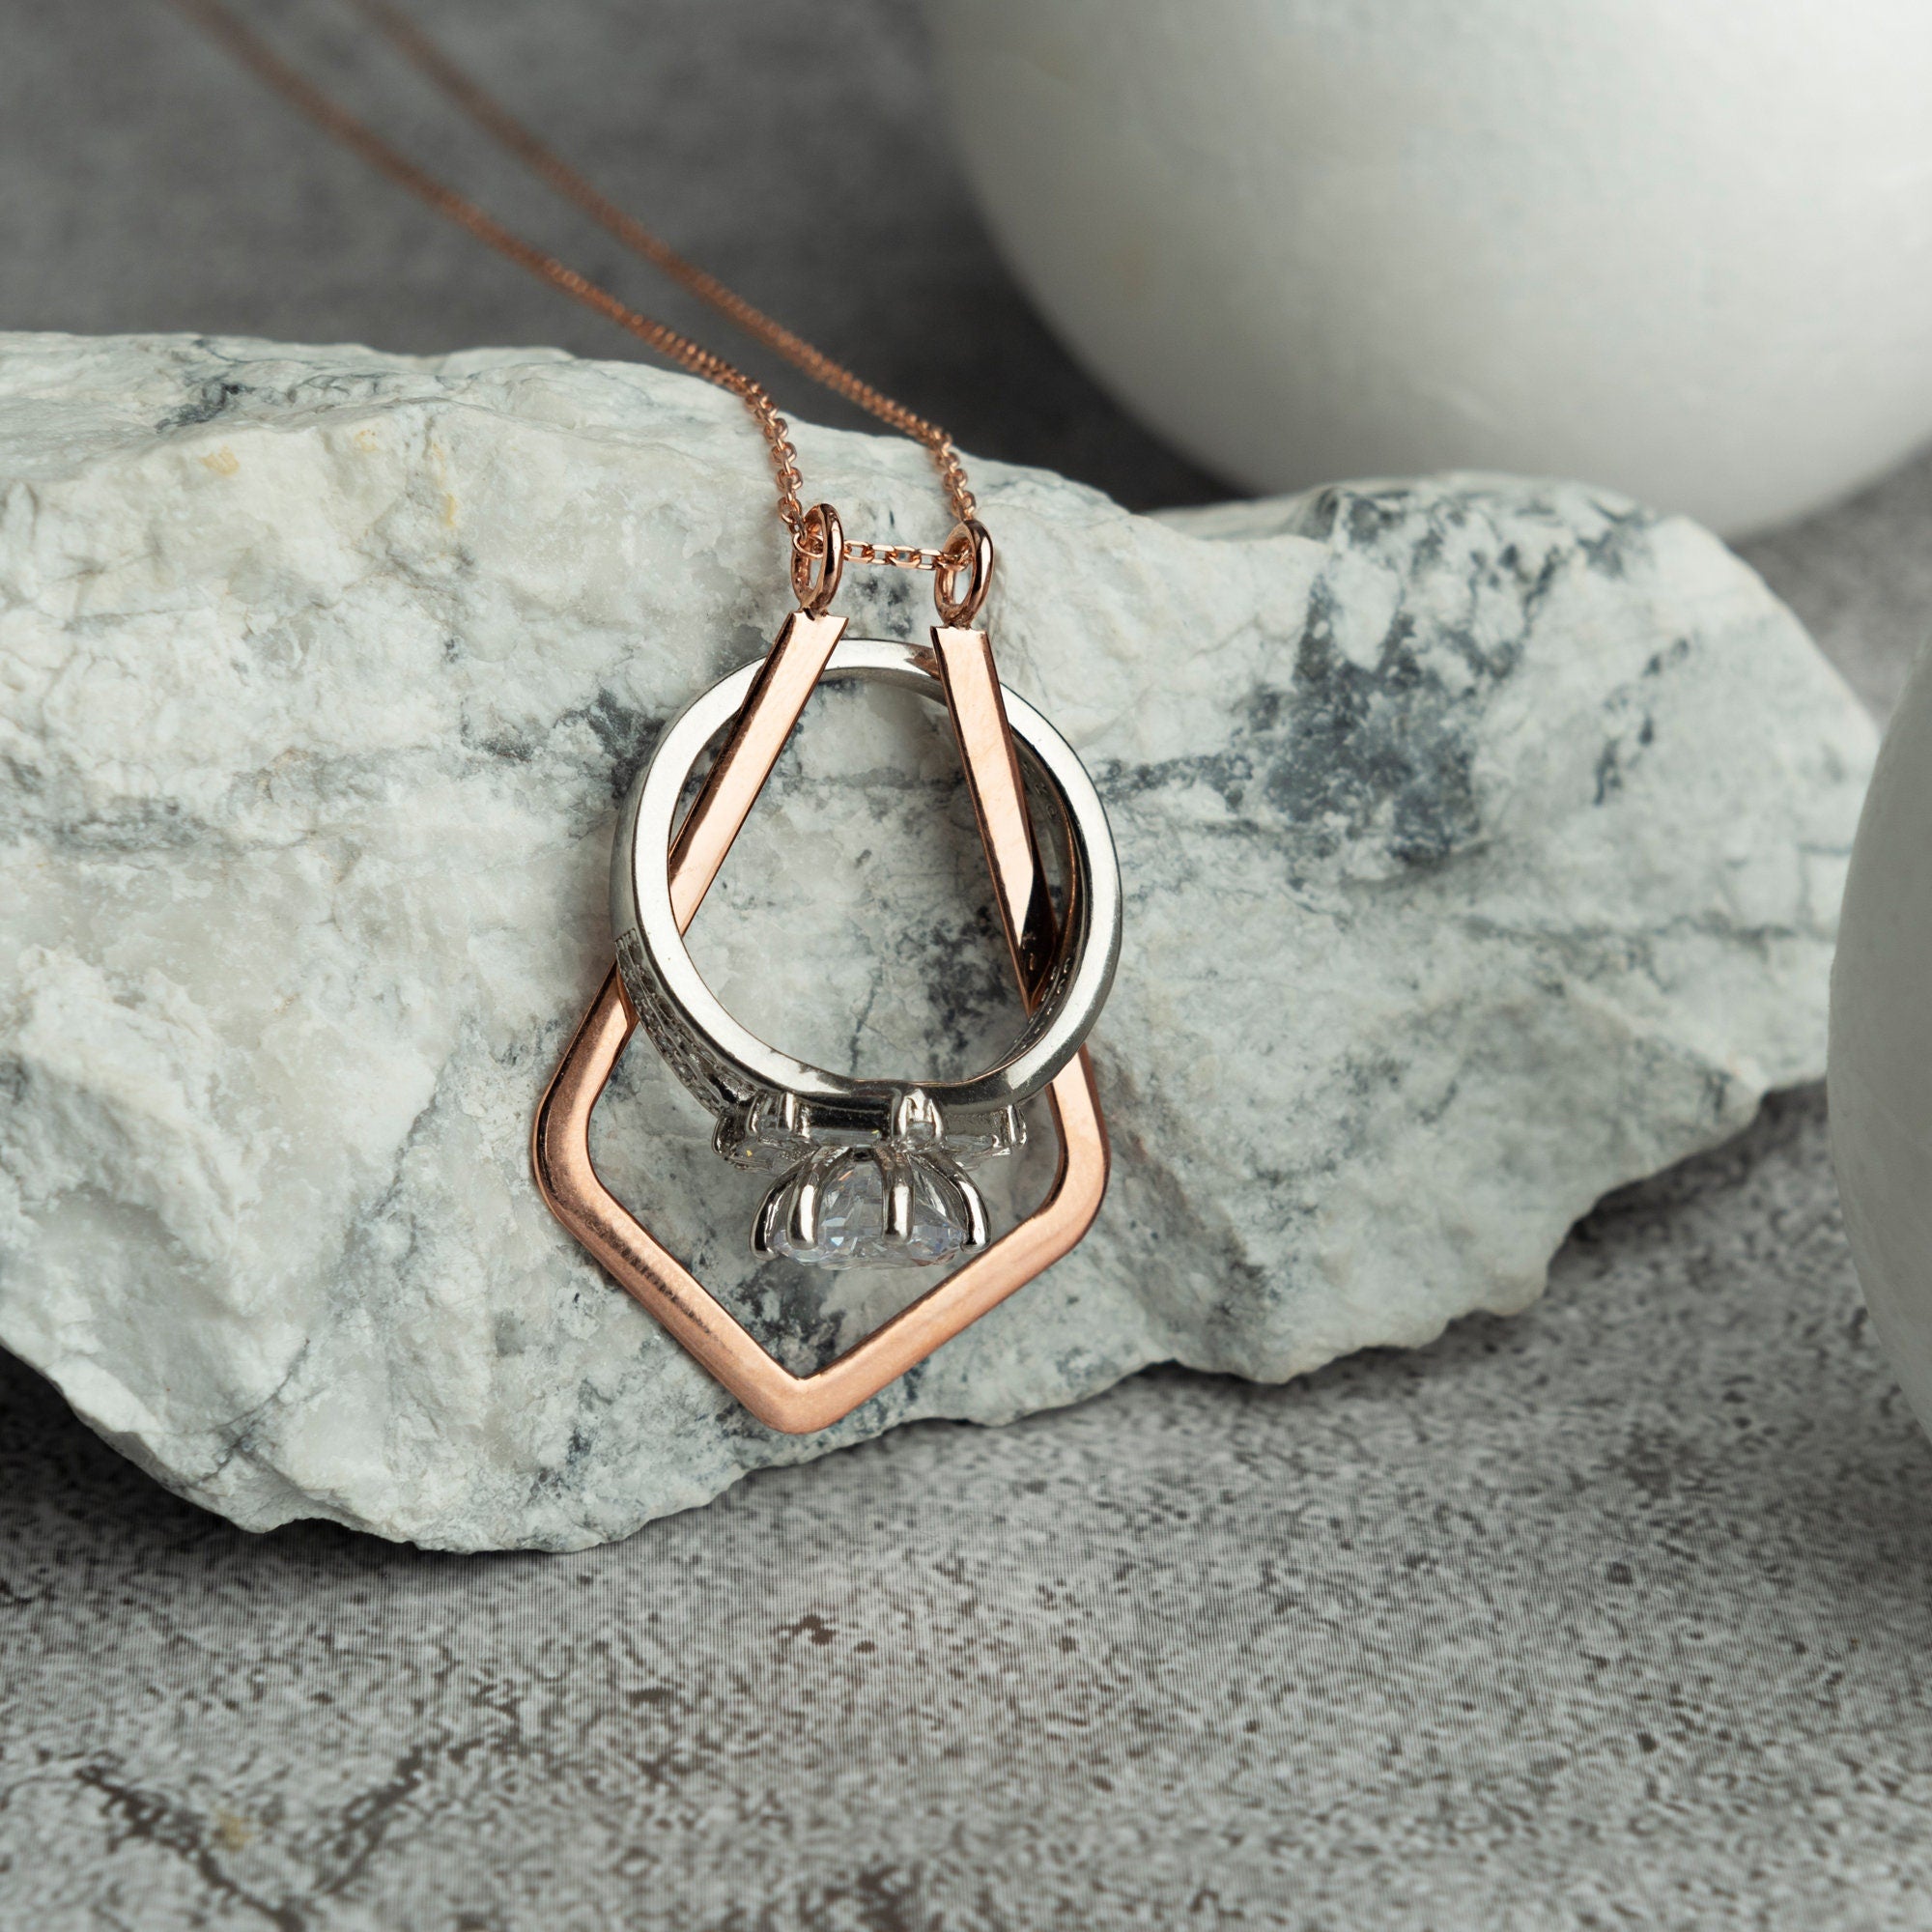 Belinda Jewelz Ring Holder Necklace In Gold, Engagement Ring Holder Necklace  - Minimalist Necklaces For Women, Dainty Necklace, Simple Necklace, Cute Ring  Holder Necklace, Aesthetic Jewelry - Walmart.com